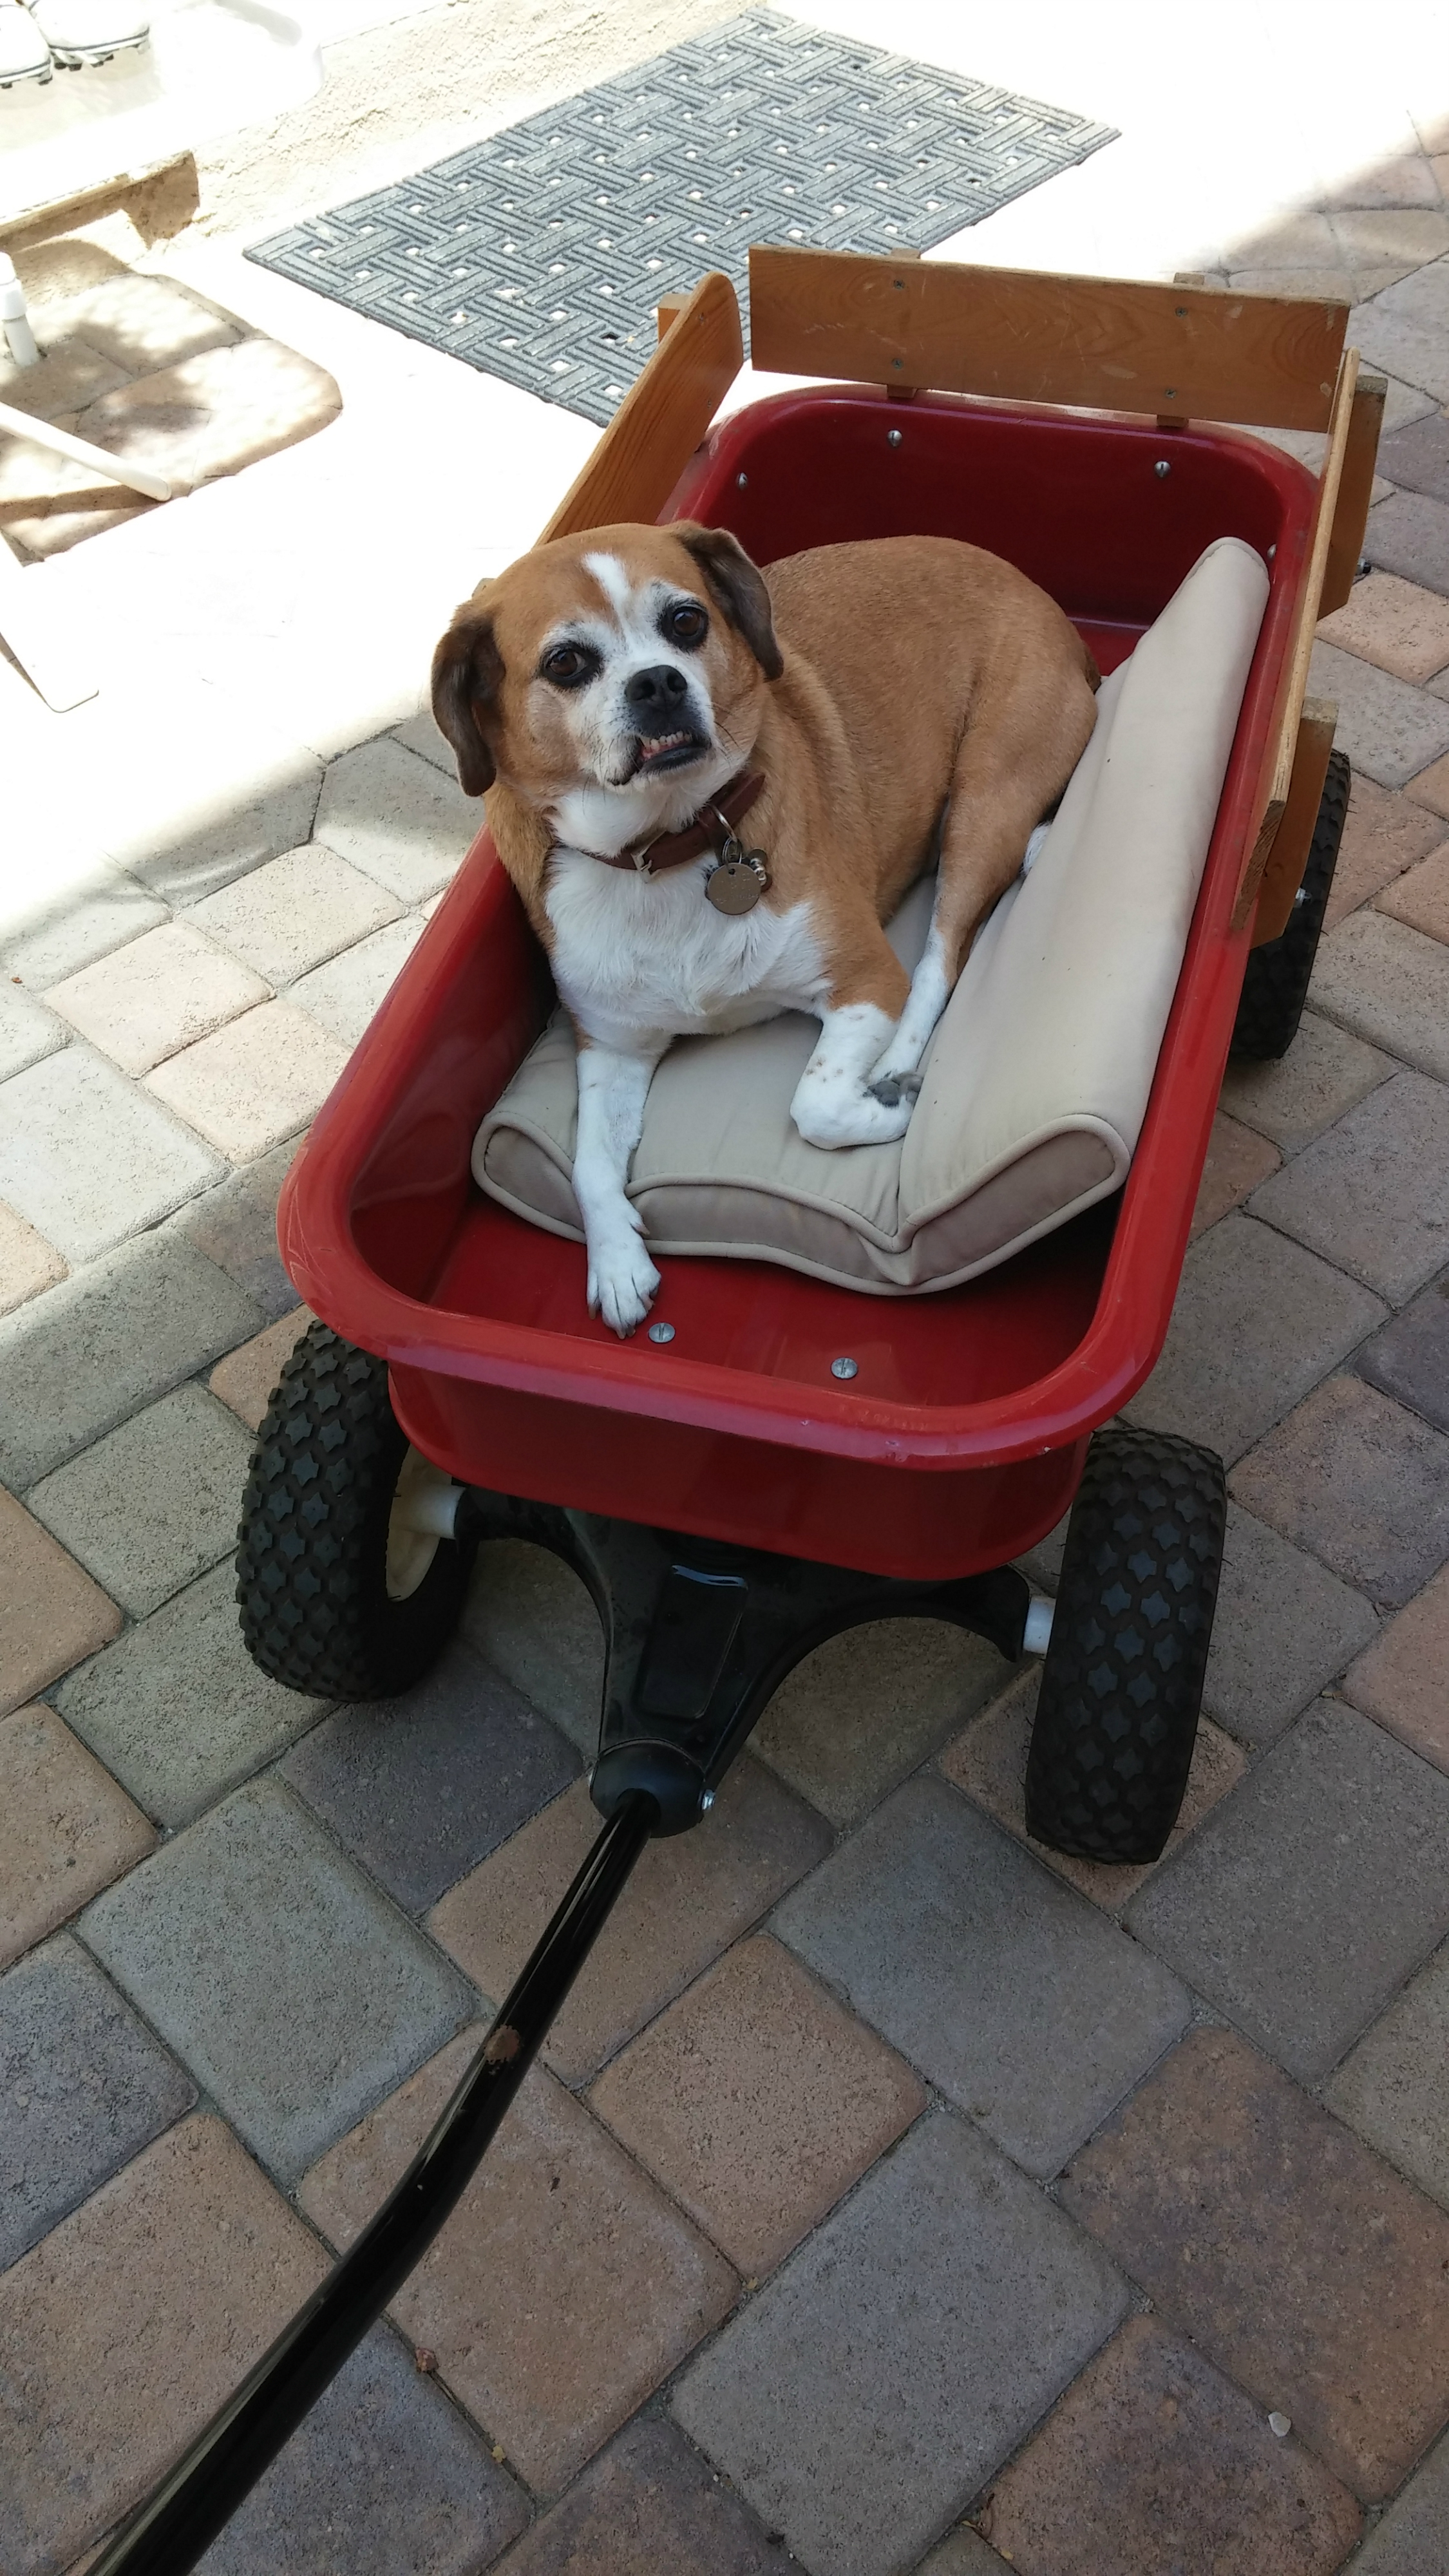 Patches chillin in a wagon